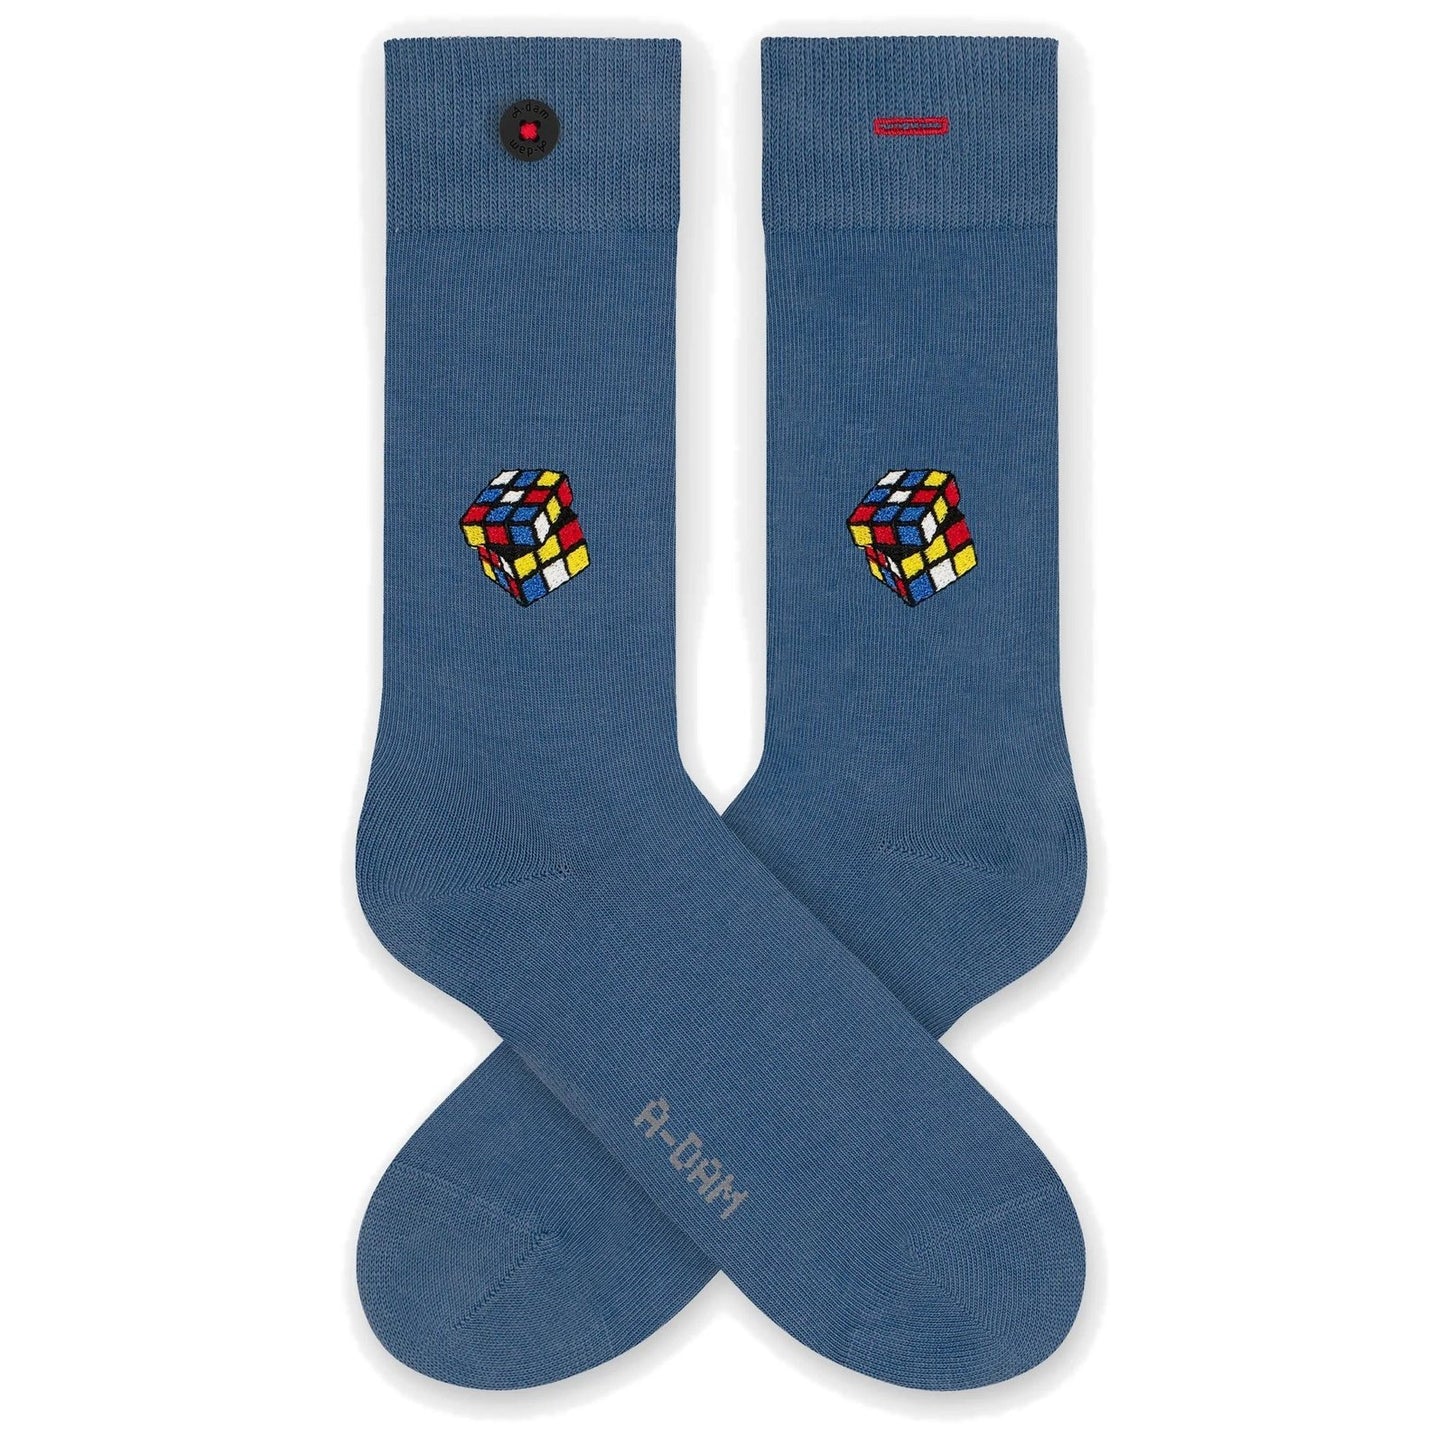 Socks with embroidery